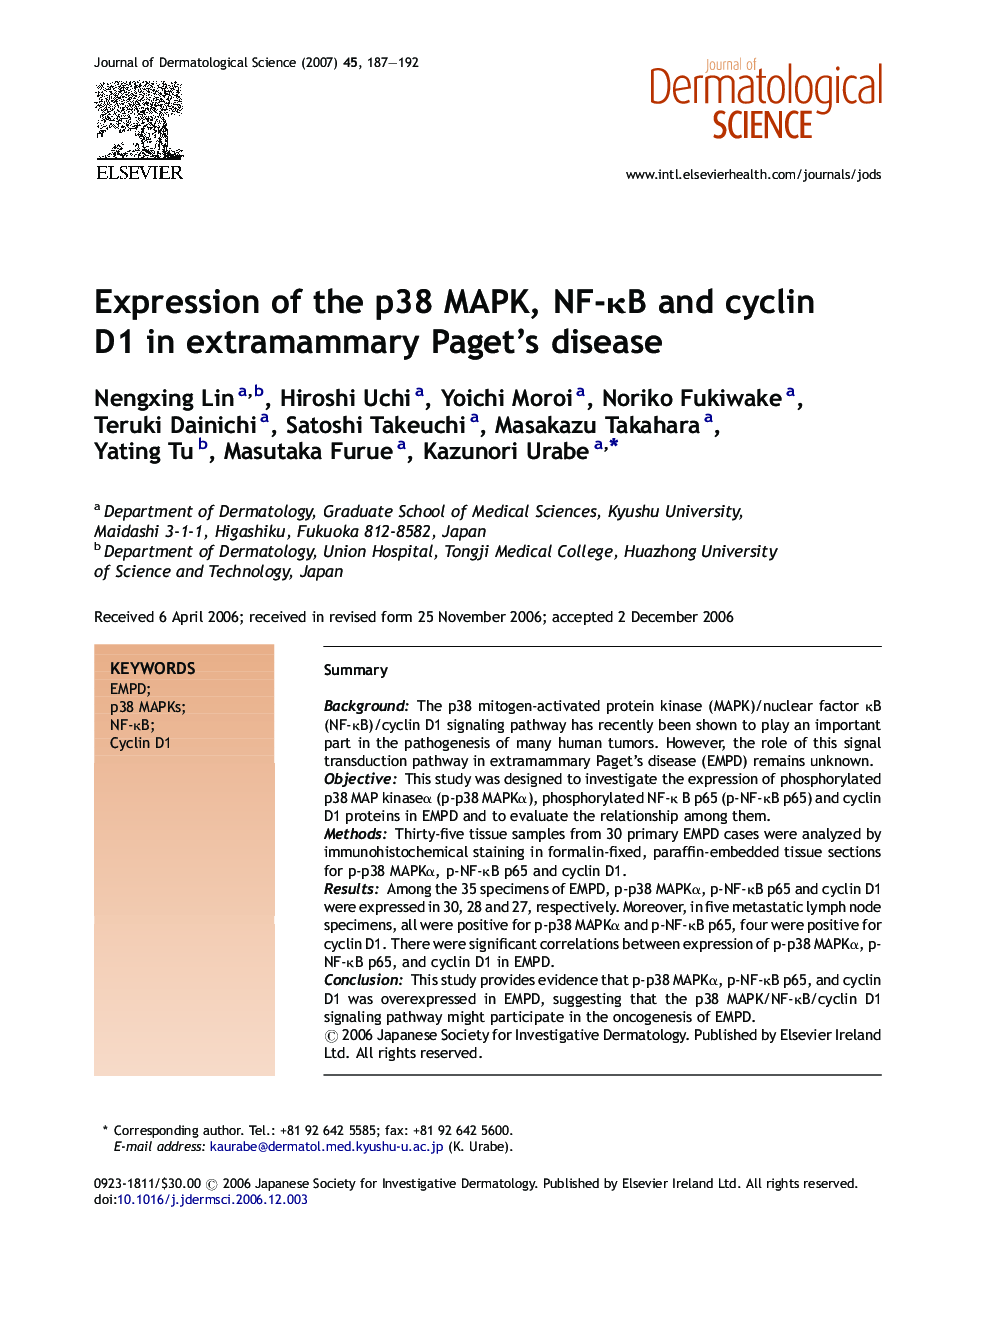 Expression of the p38 MAPK, NF-ÎºB and cyclin D1 in extramammary Paget's disease